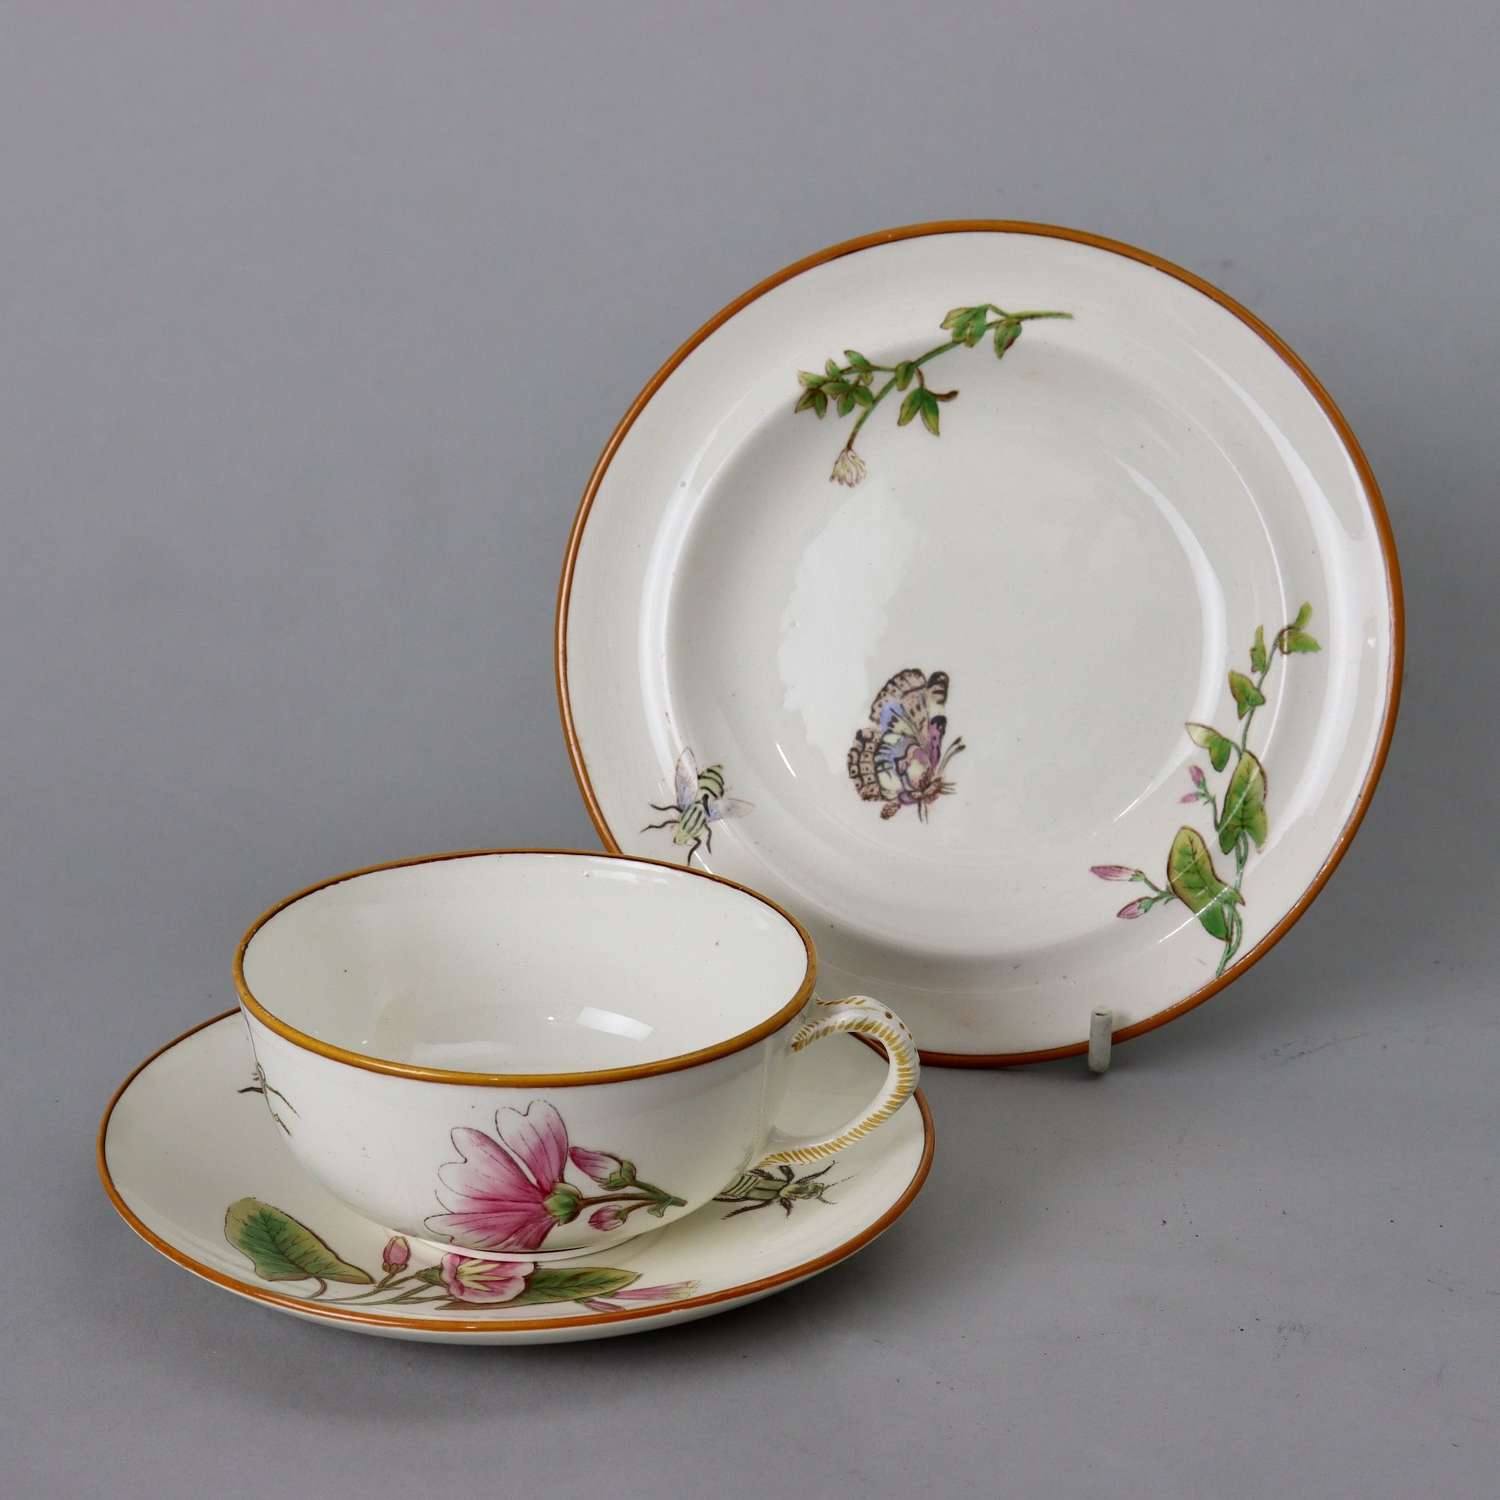 Wedgwood Trio Decorated with Butterflies